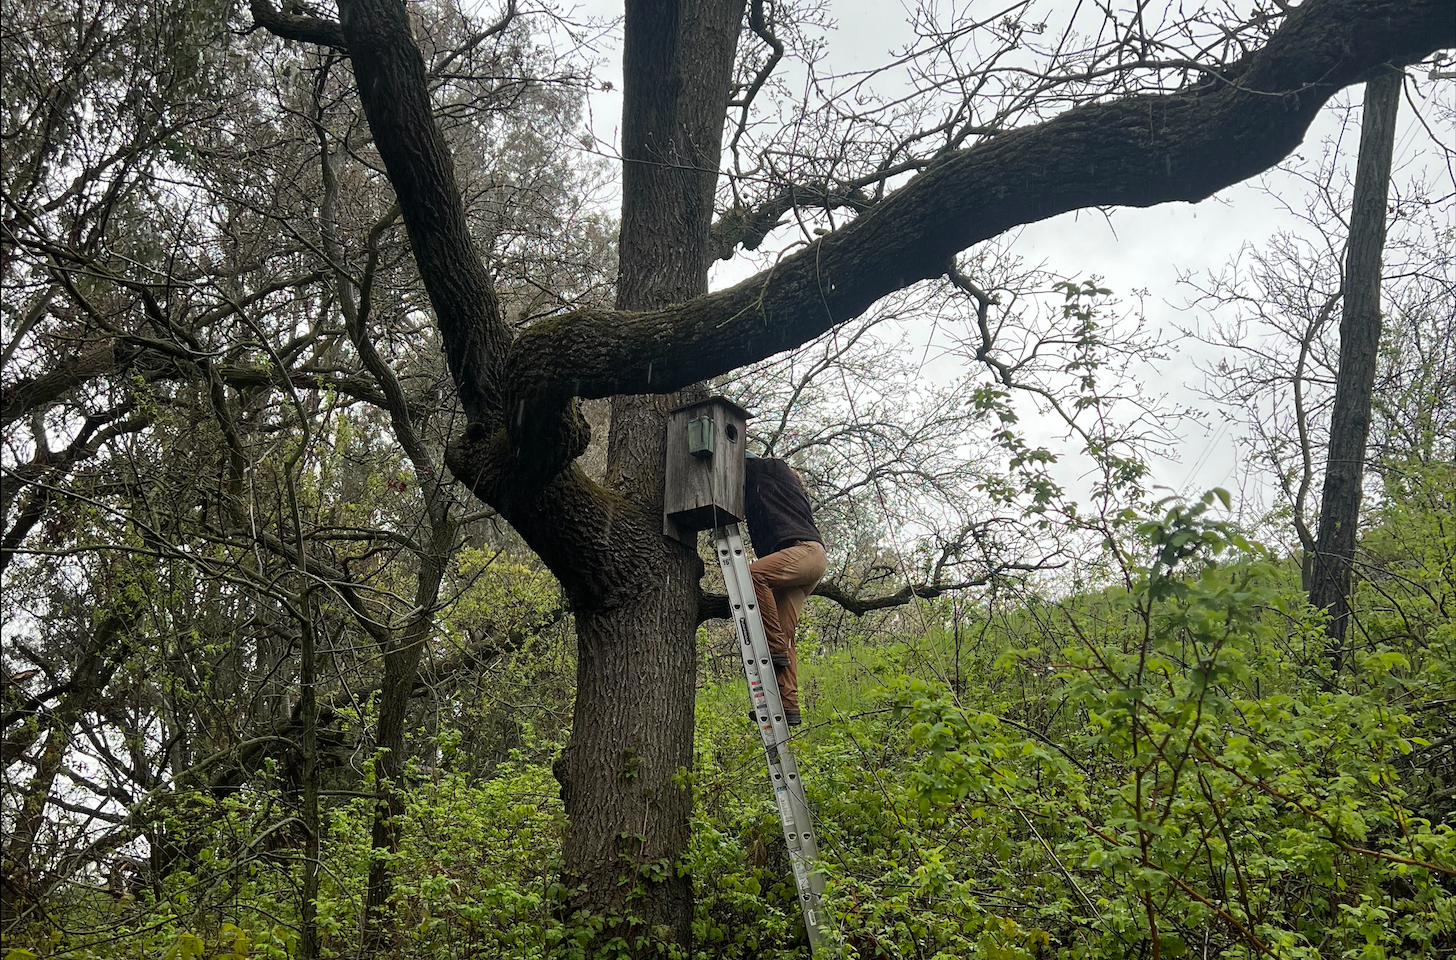 Most of Joe Sweeney's nest boxes were easily accessible. However, some were up to 15 feet high. (Courtesy Joe Sweeney)